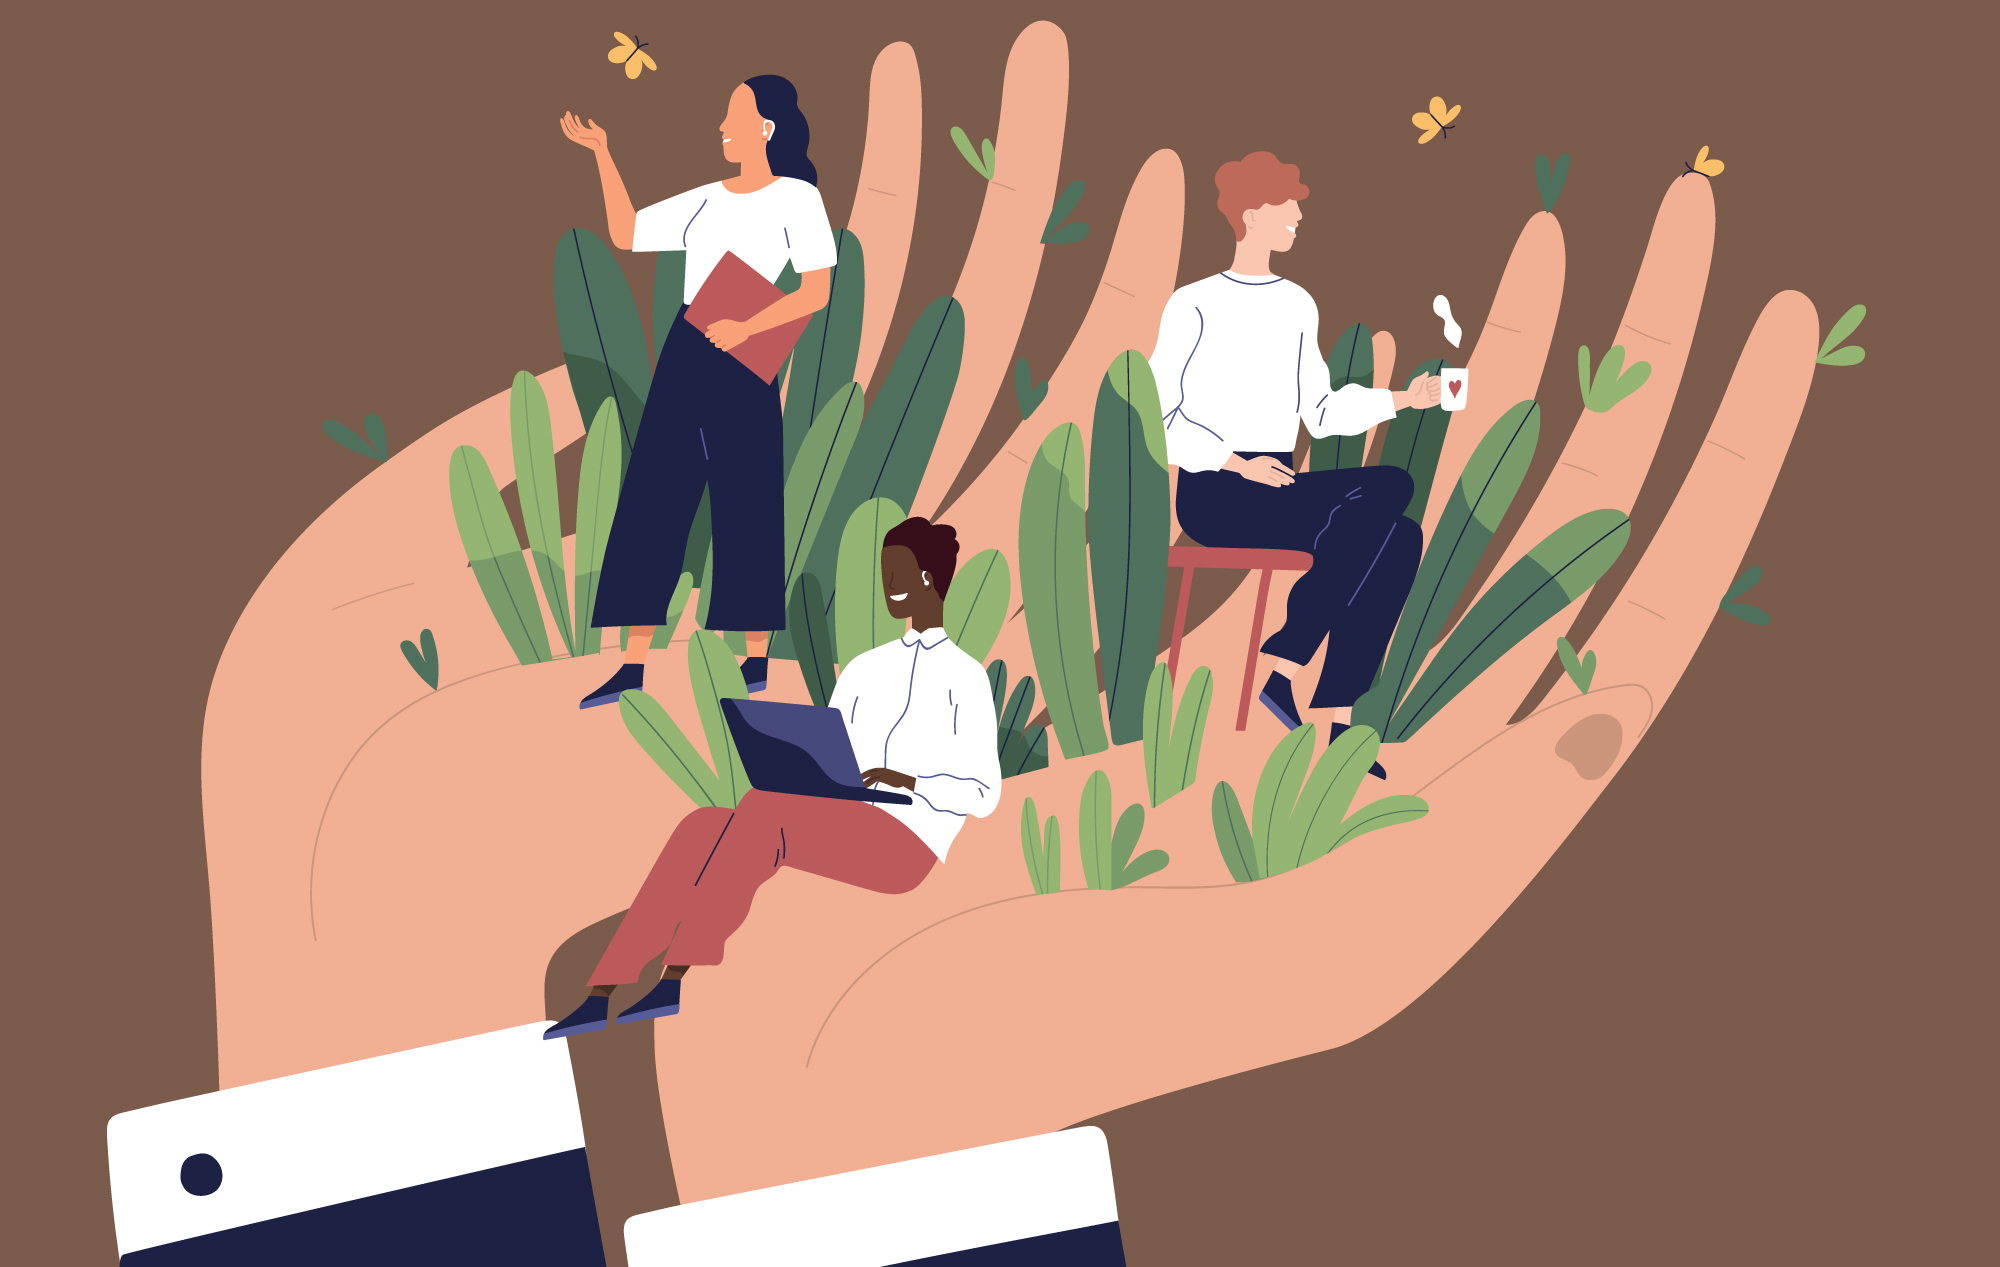 Illustration of two giant hands supporting three office workers